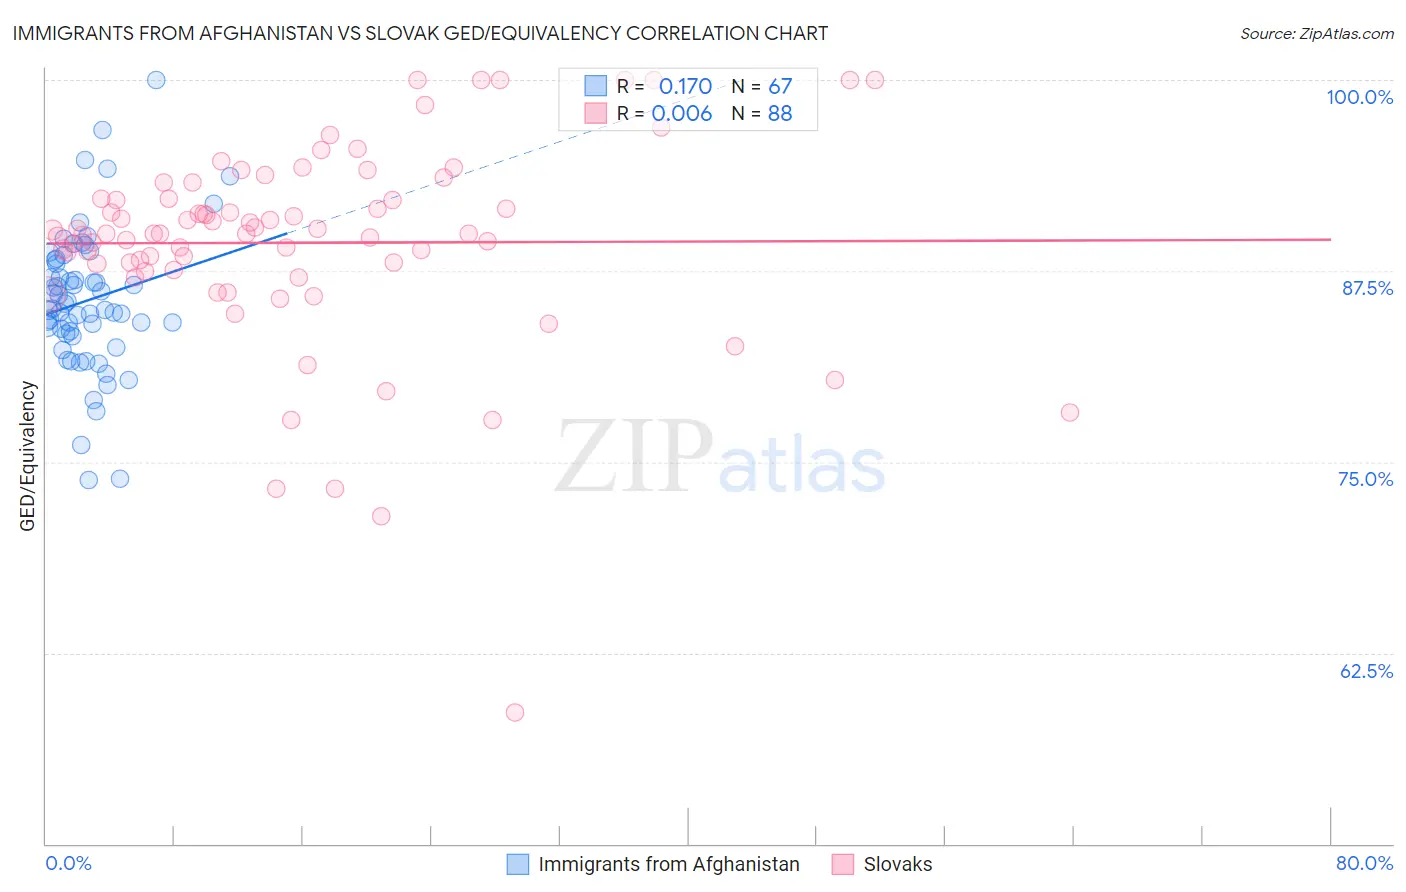 Immigrants from Afghanistan vs Slovak GED/Equivalency